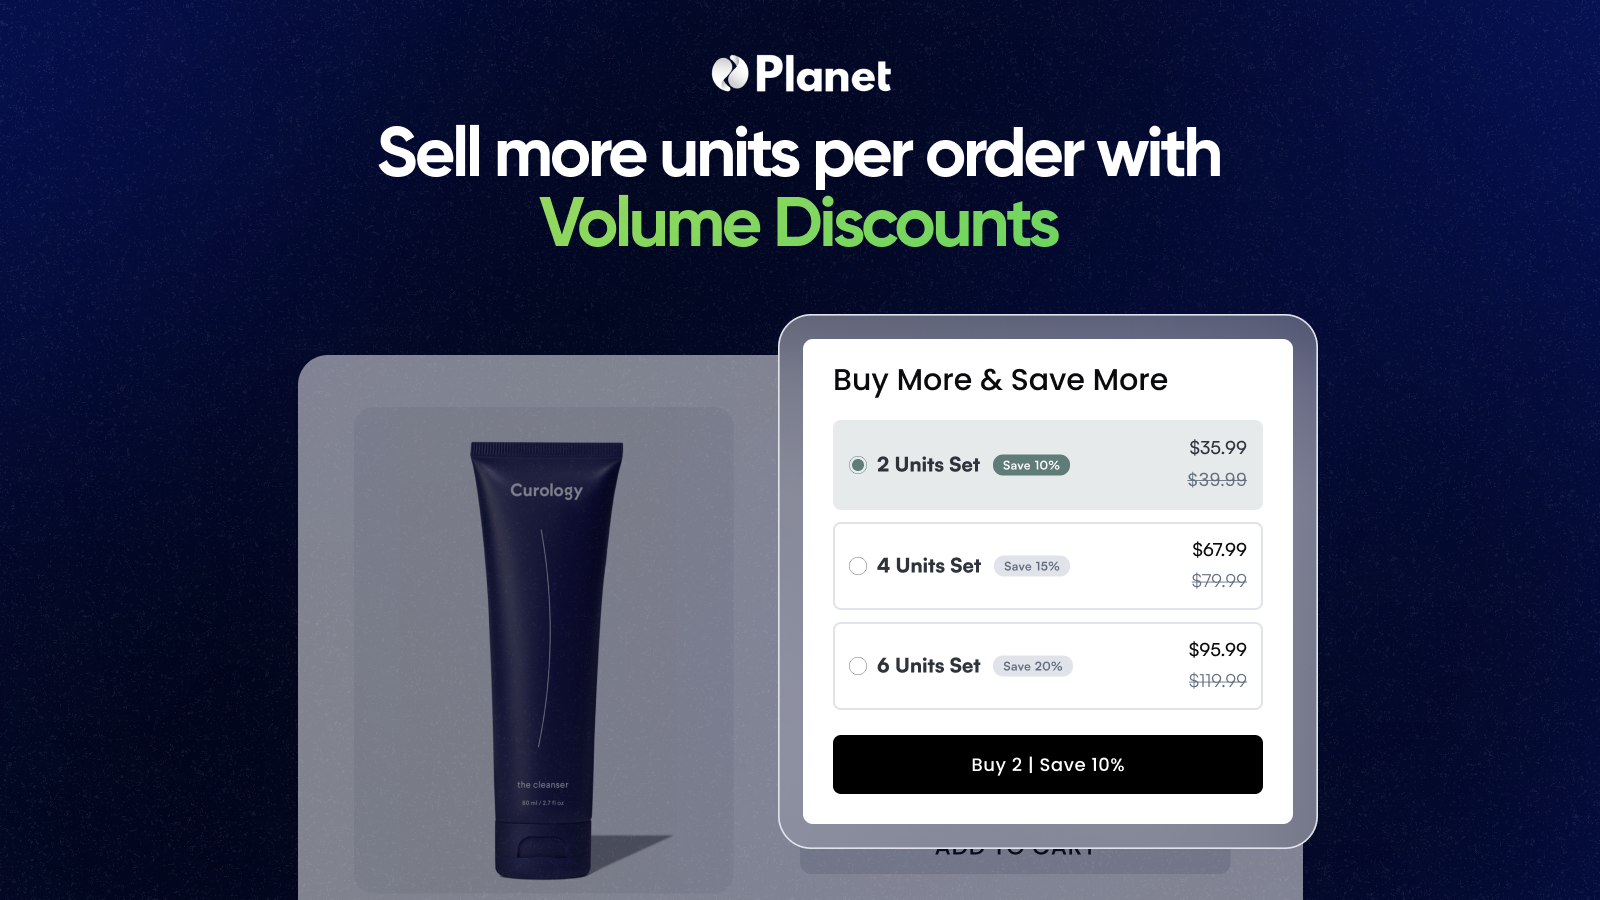 Sell more units per order with volume discounts